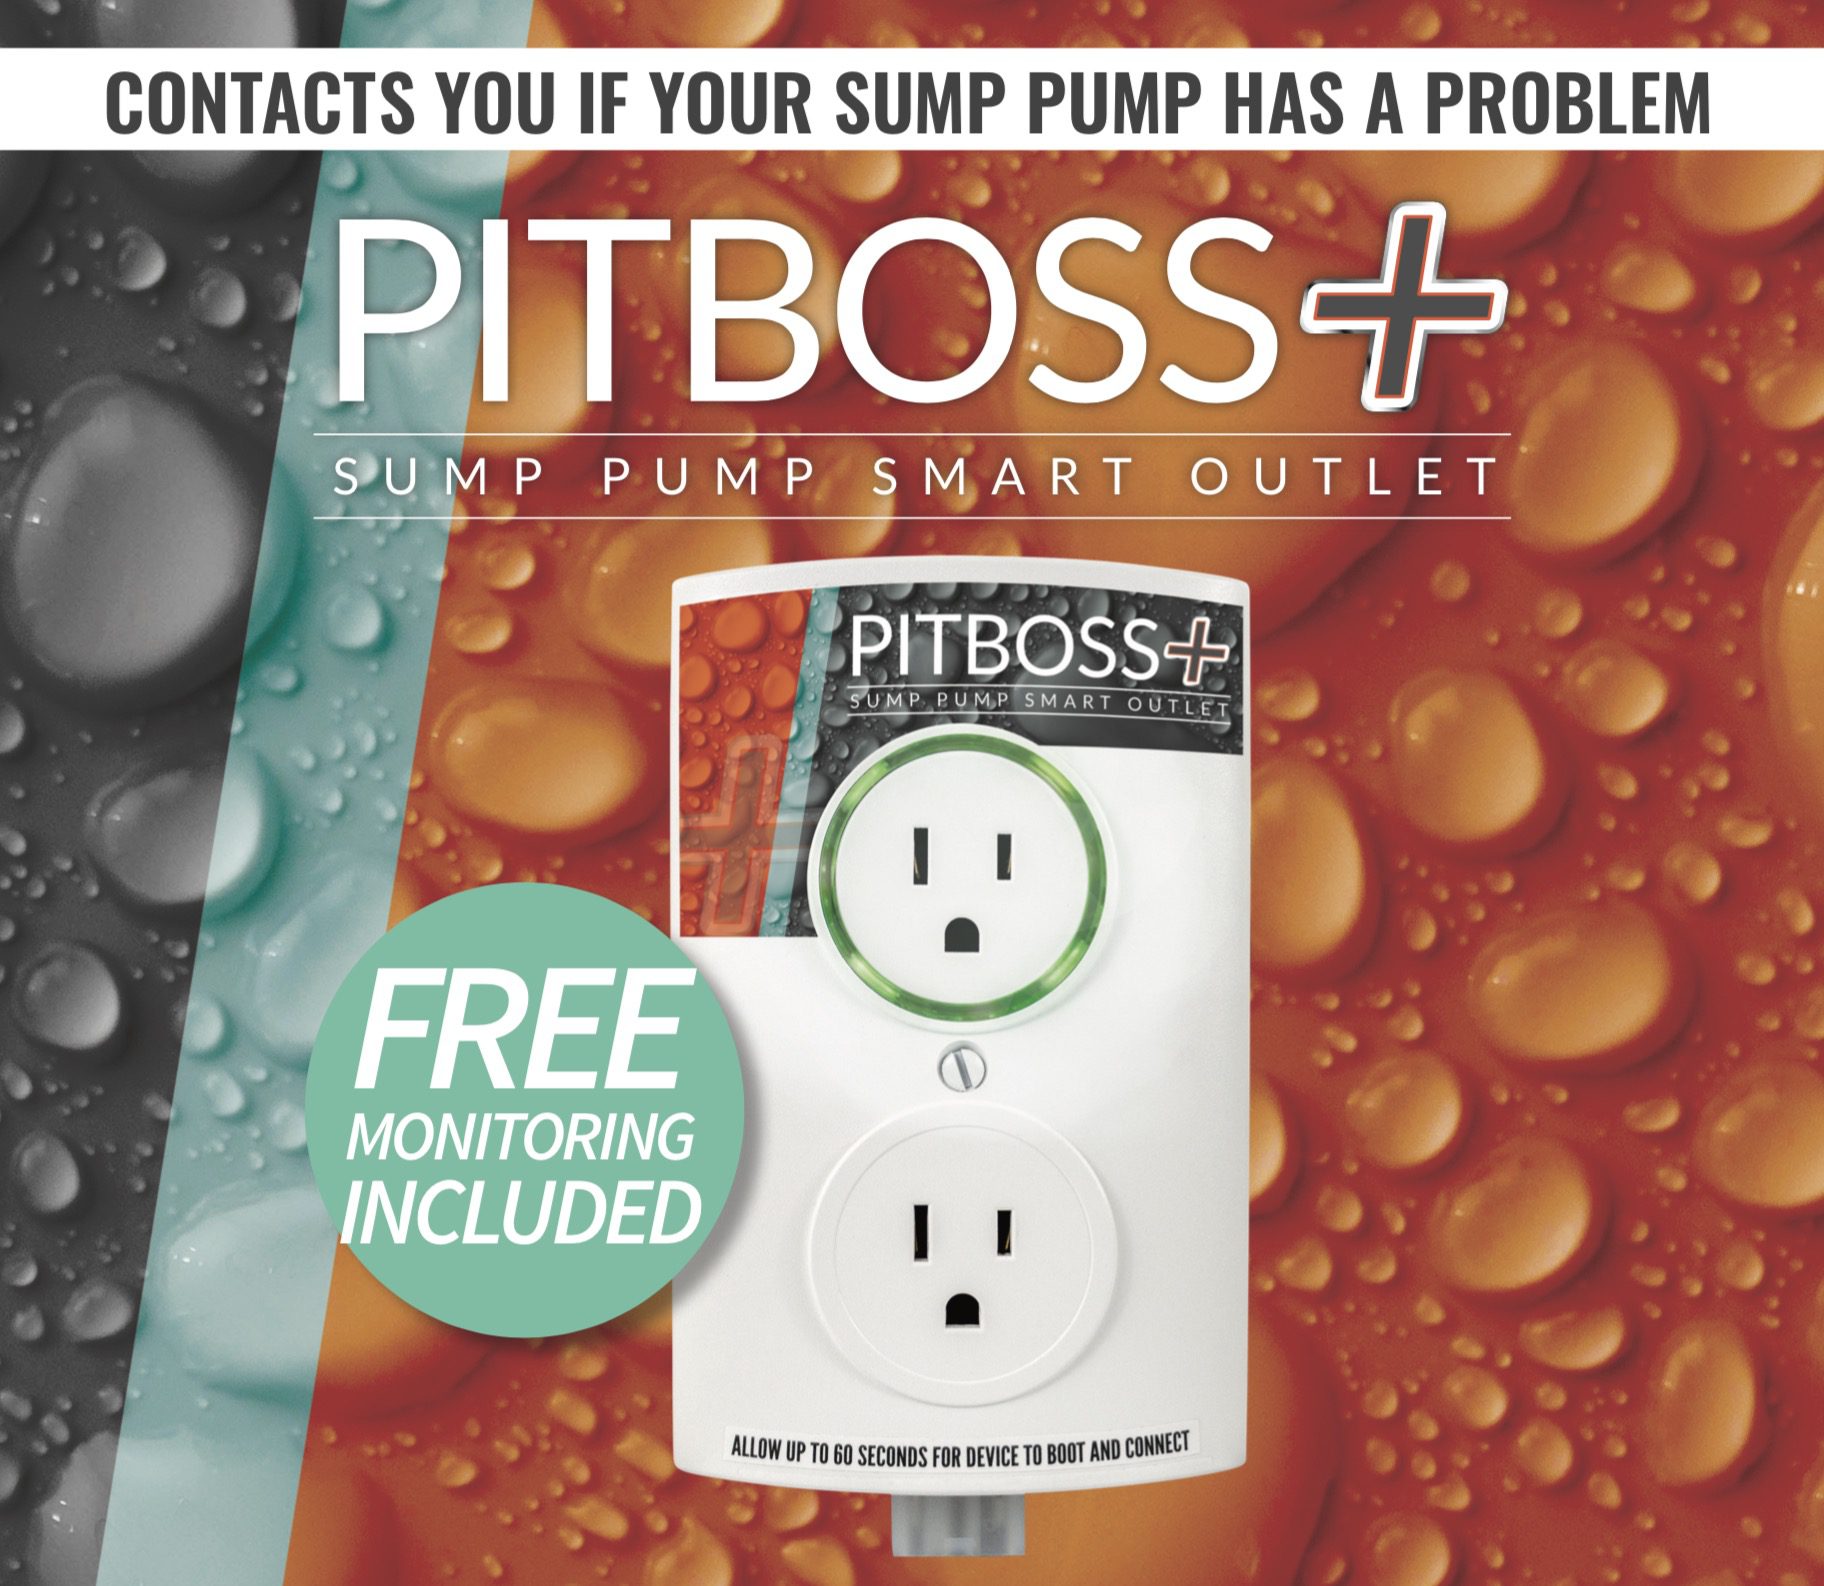 Contacts you if your sump pump has a problem - PitBoss+ Sump Pump Smart Outlet, with Free monitoring included